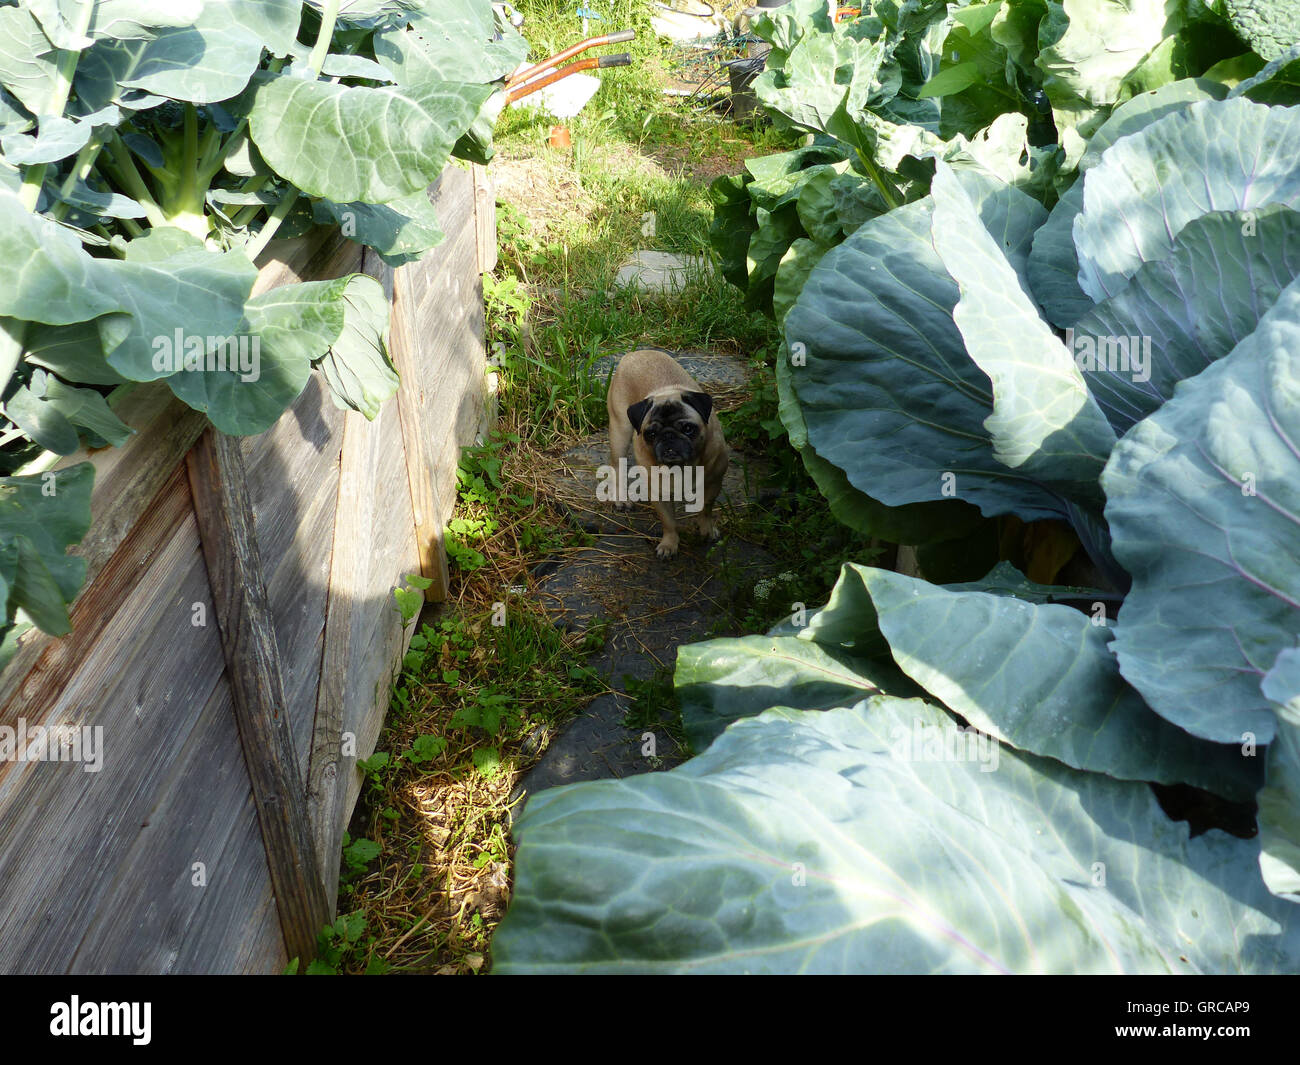 Pug Between Two Raised Beds With Cabbage In The Garden Stock Photo